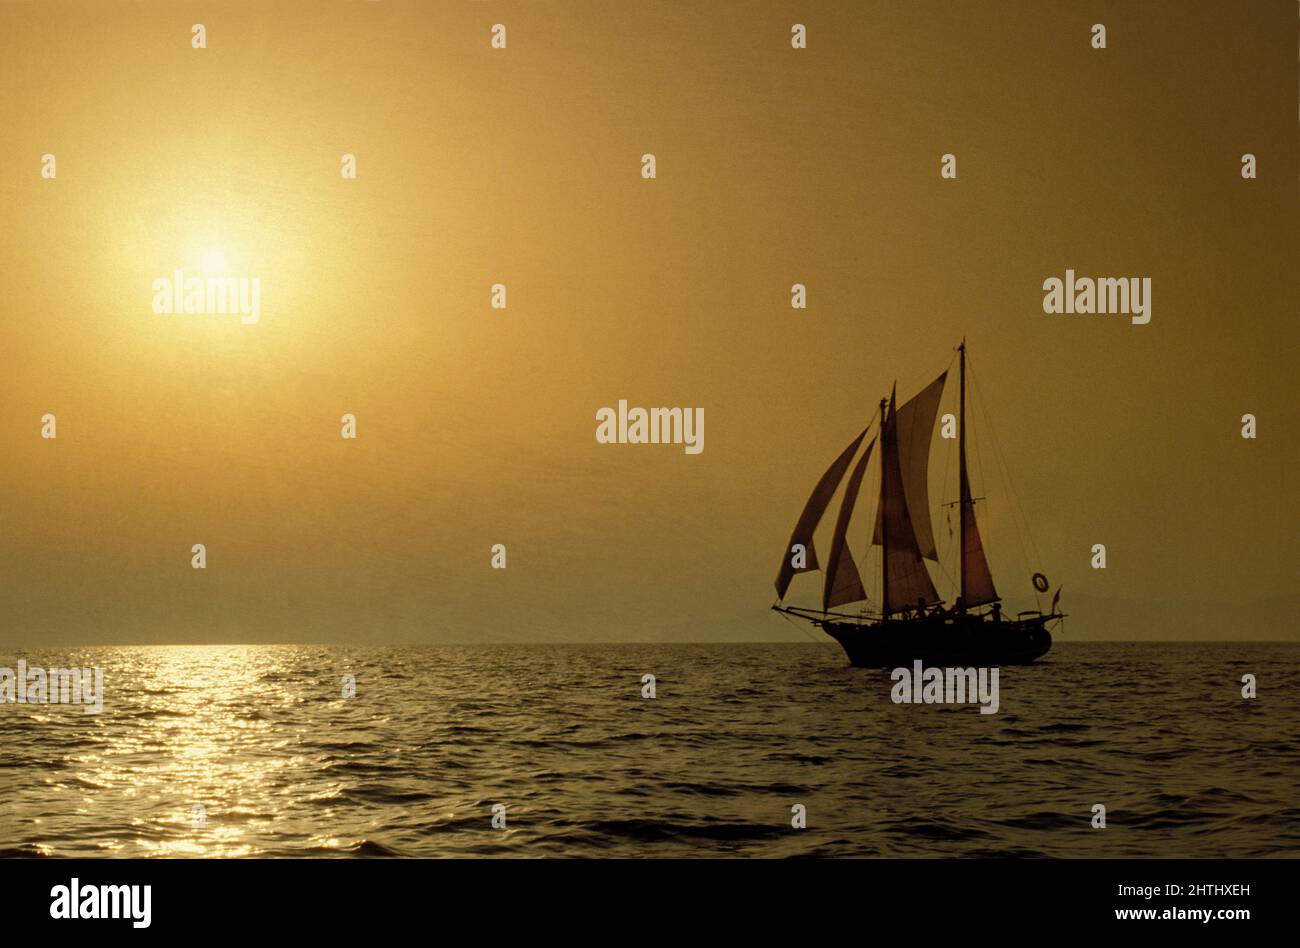 sailing boat goelette profile view on sunset yellow sun and sky background Stock Photo